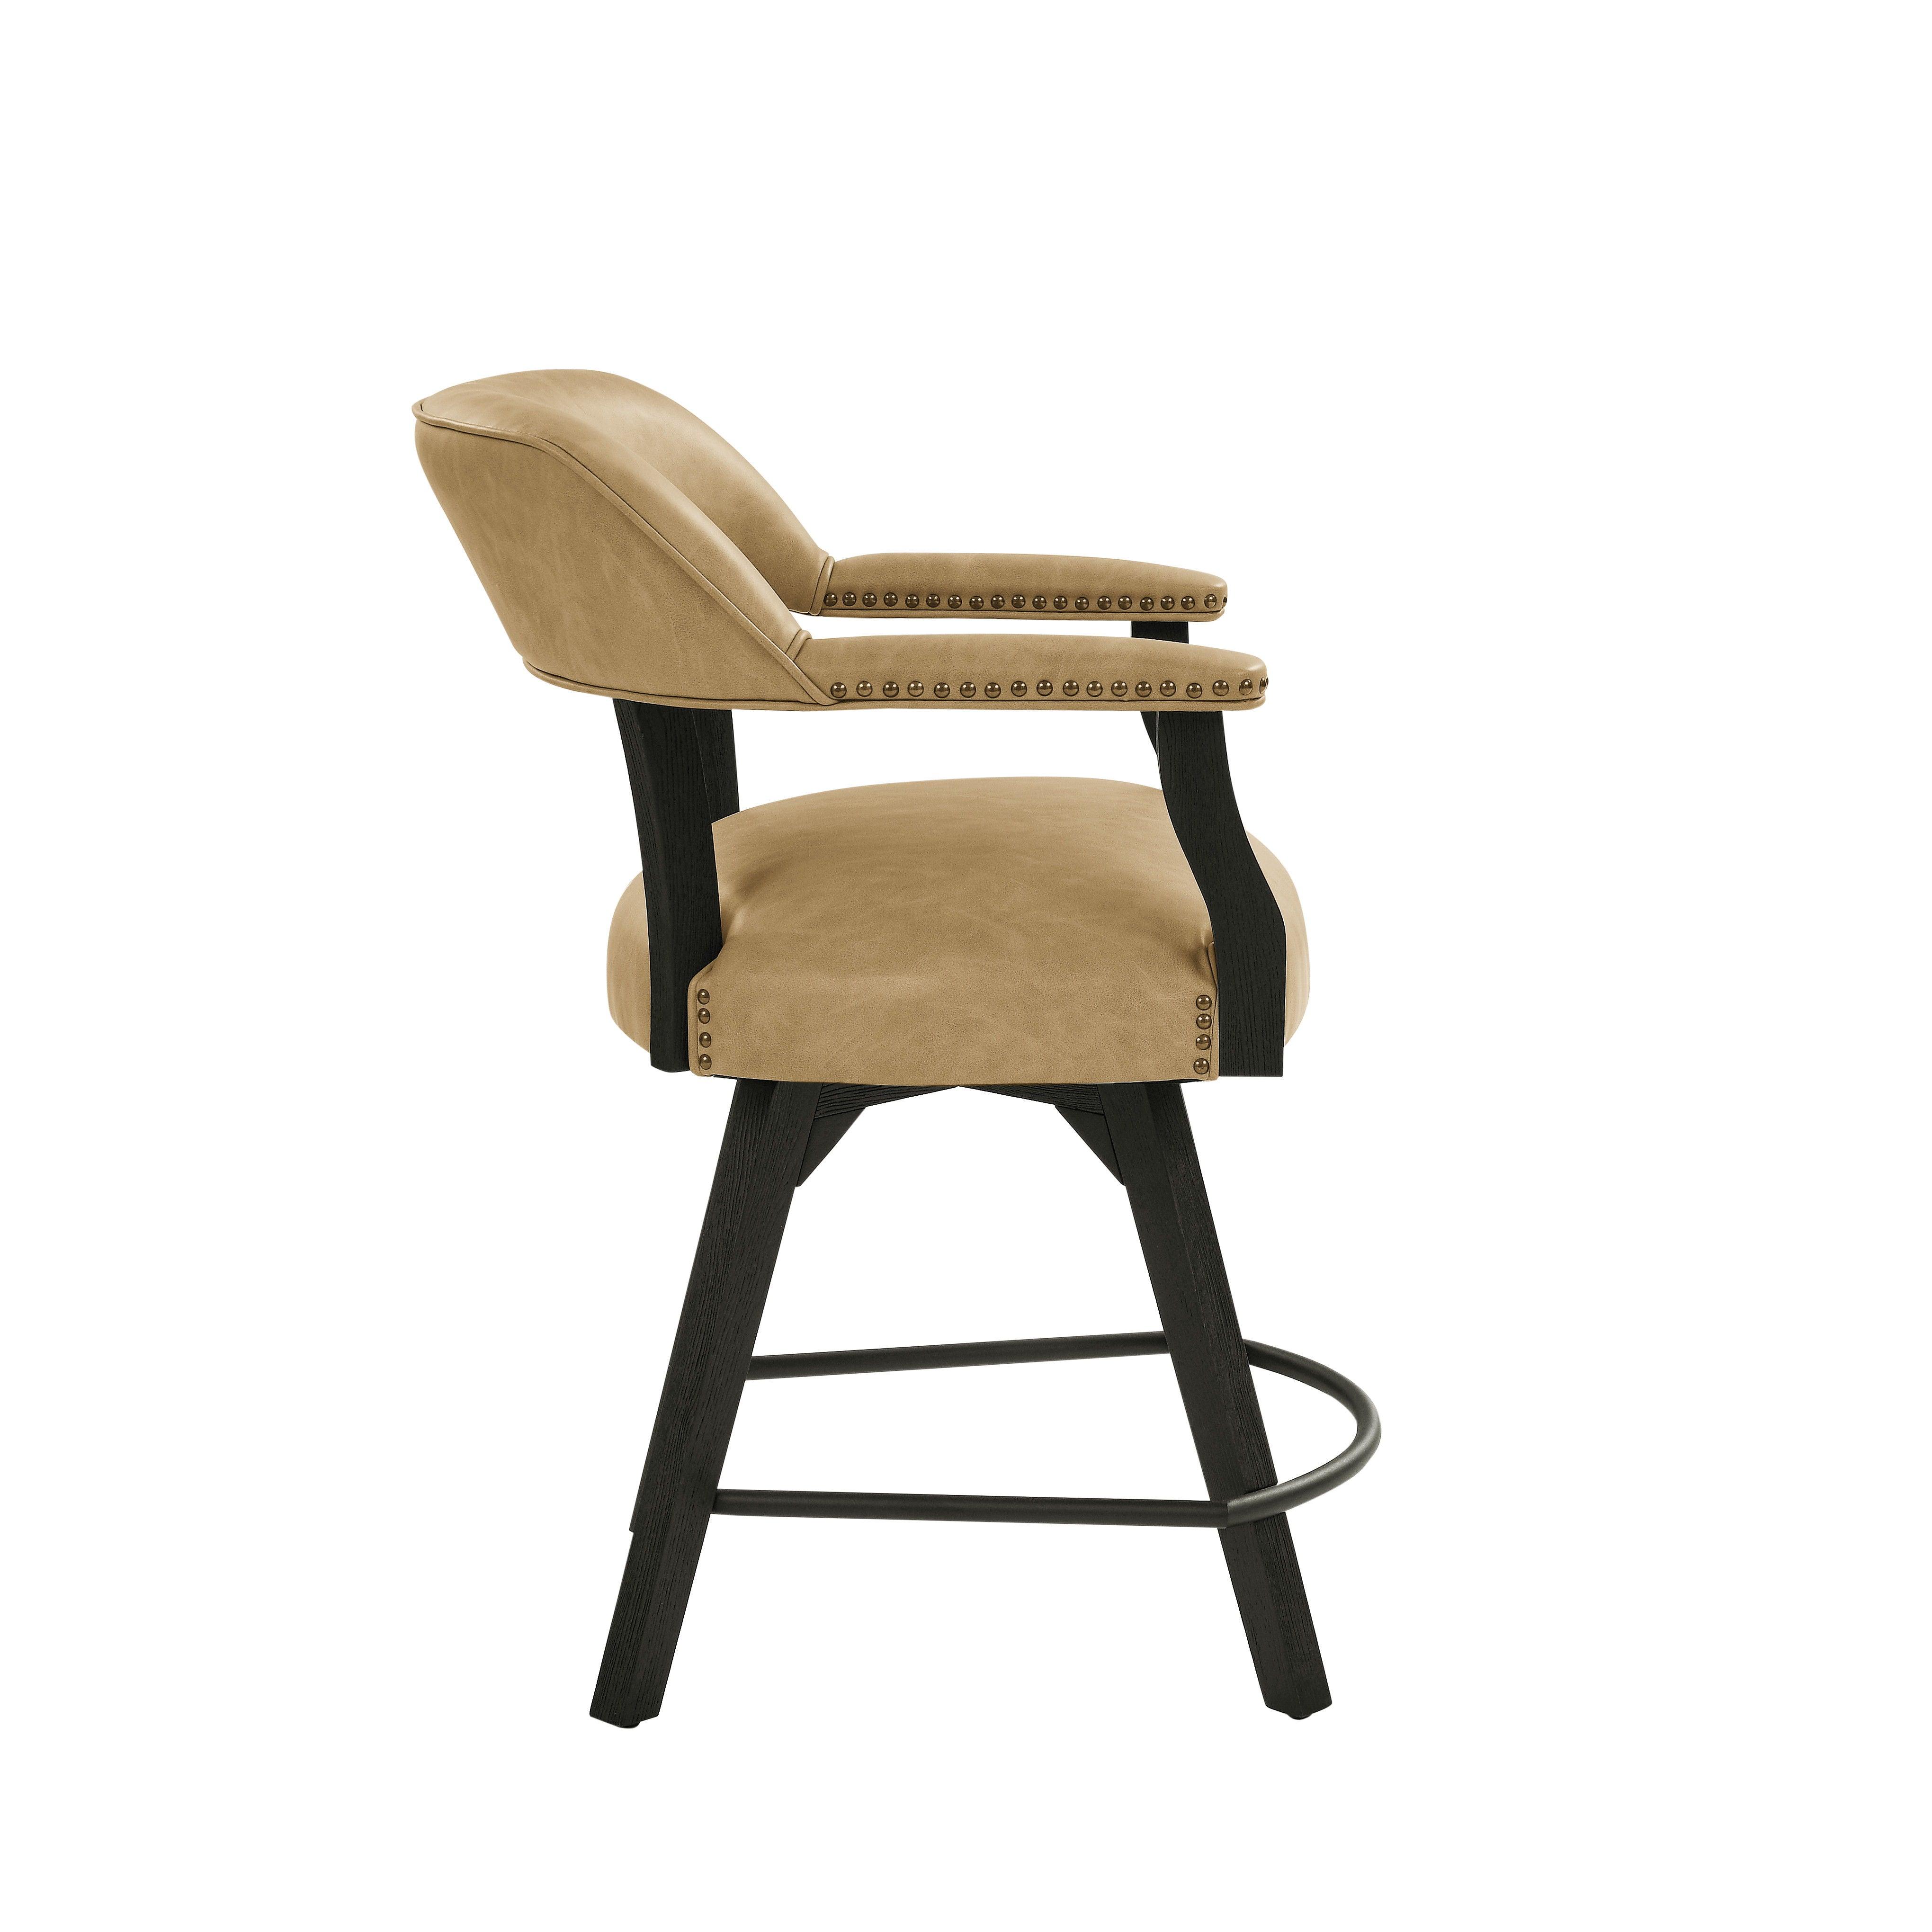 Steve Silver Furniture - Rylie - Counter Captains Chair Vegan Leather - Black / Sand - 5th Avenue Furniture